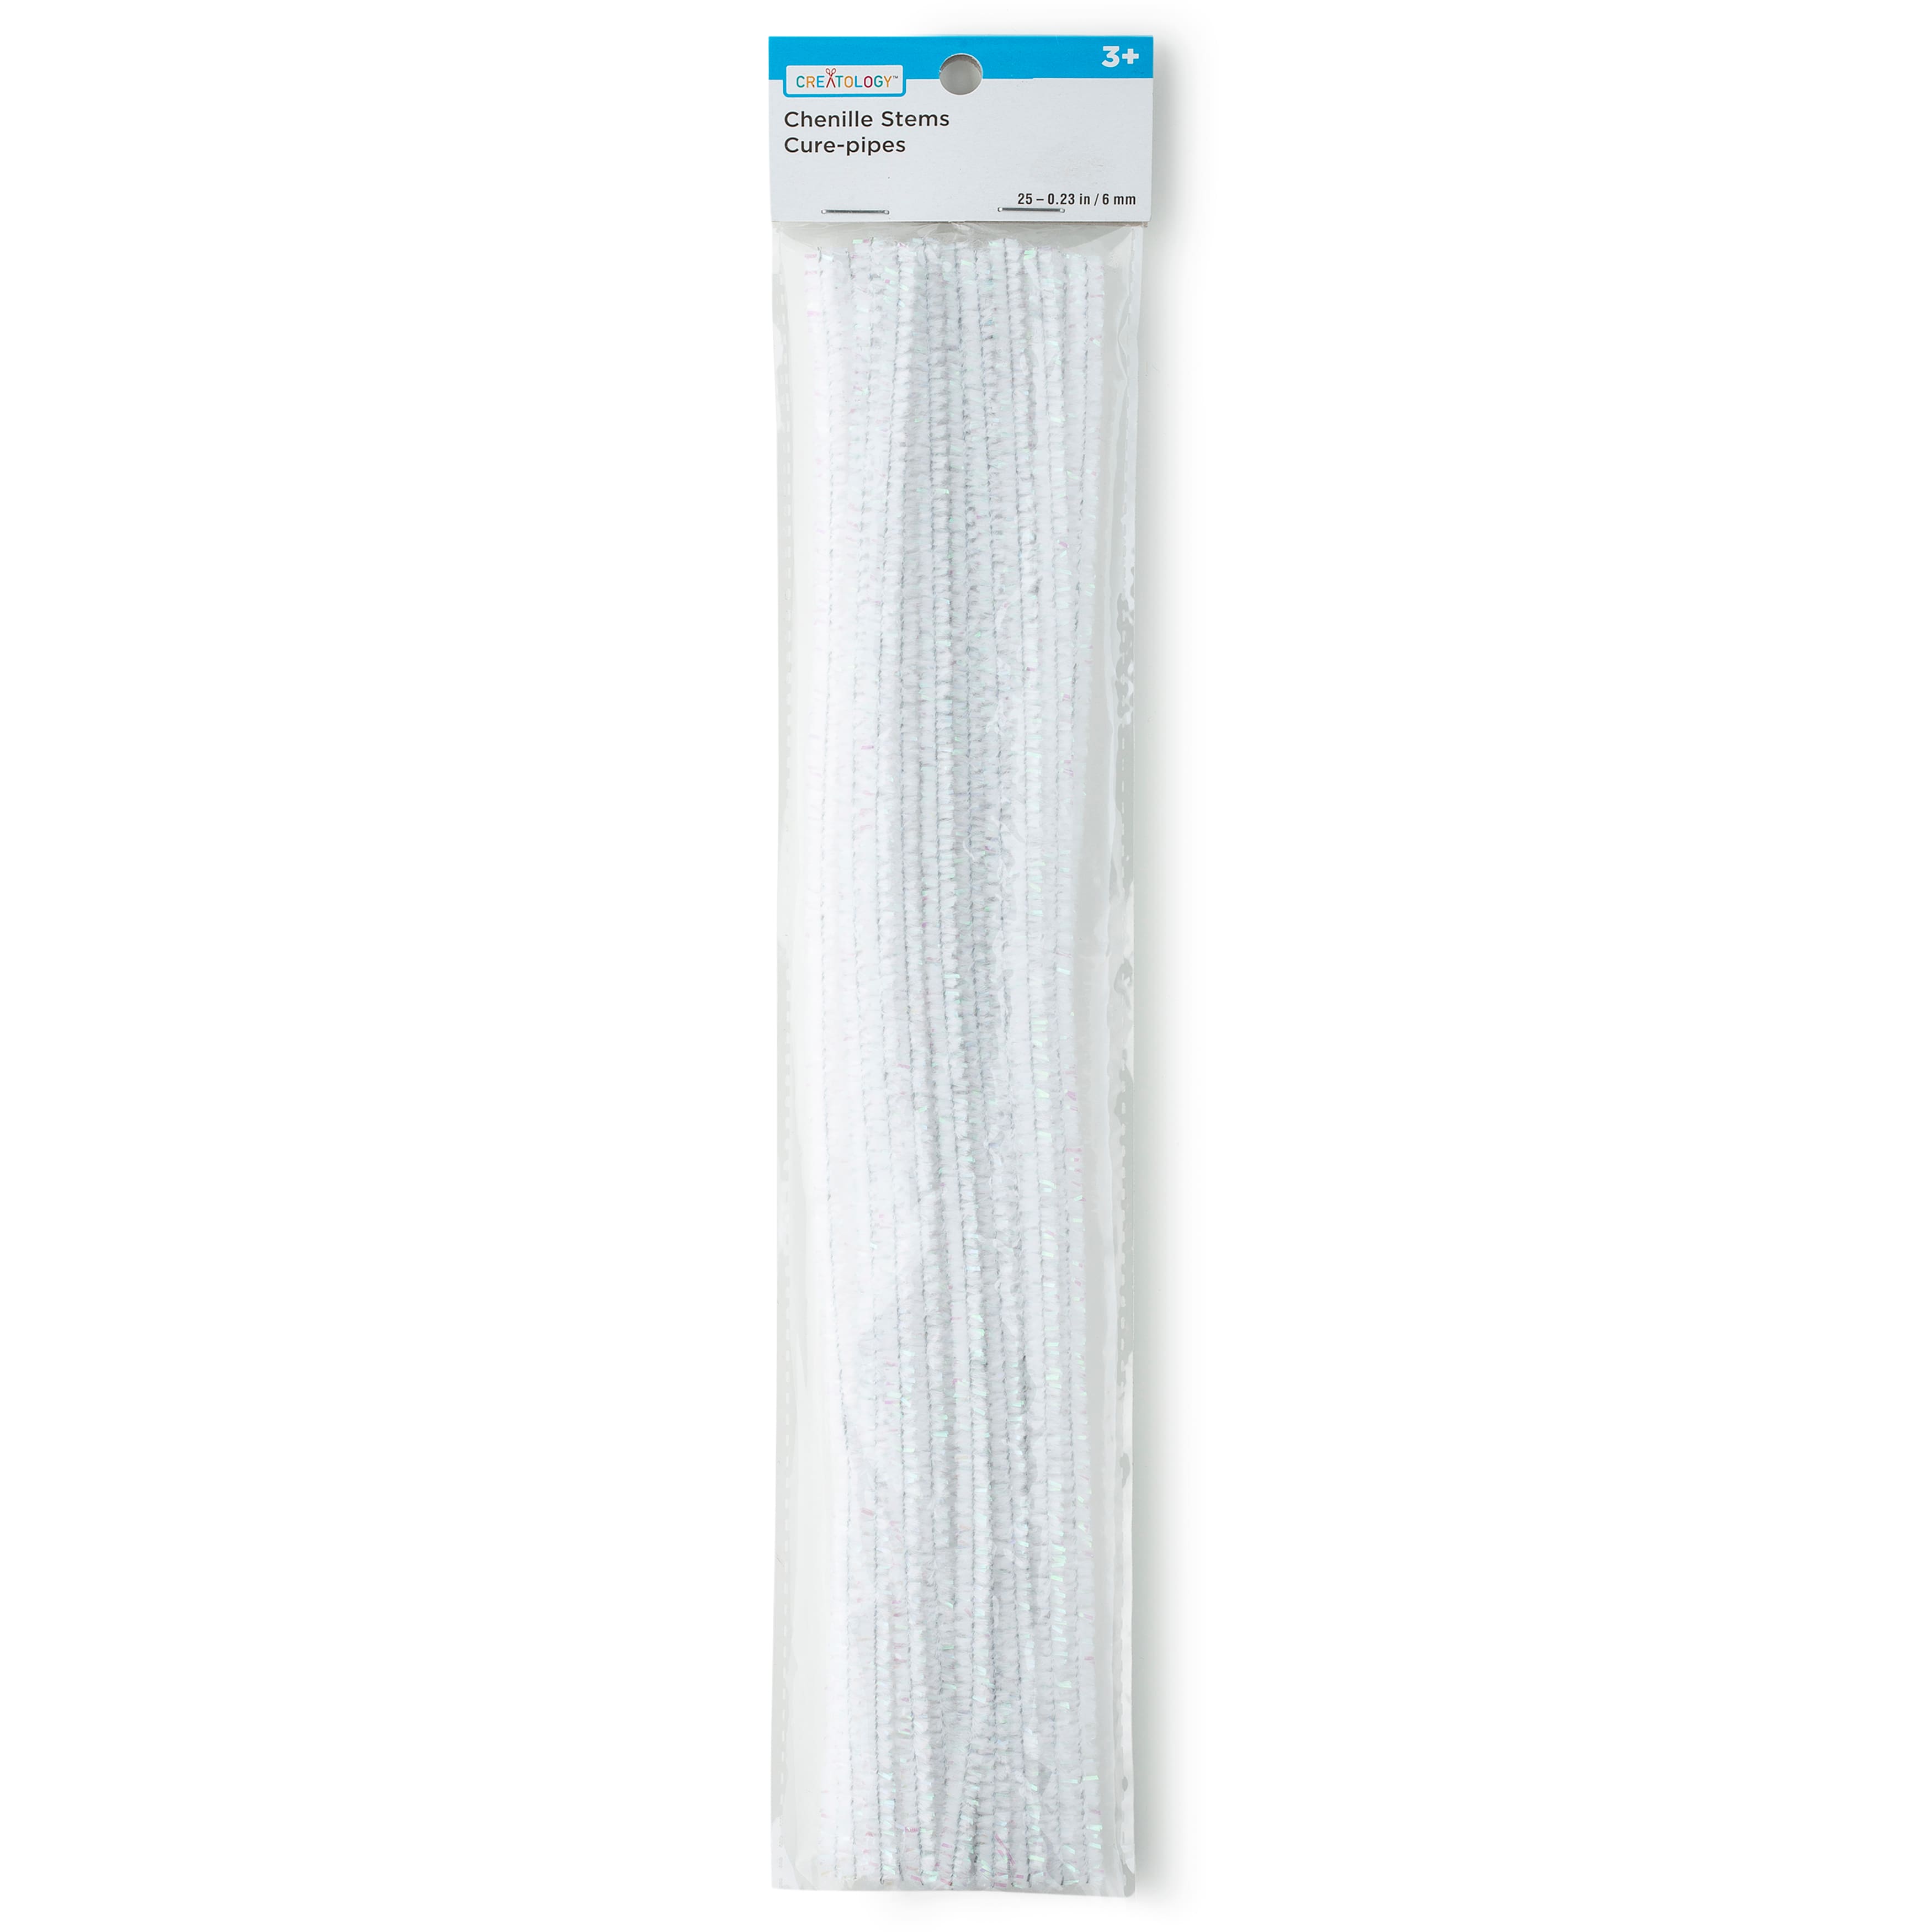 12 Packs: 350 Ct. (4,200 Total) White Chenille Pipe Cleaners by Creatology, Size: 6